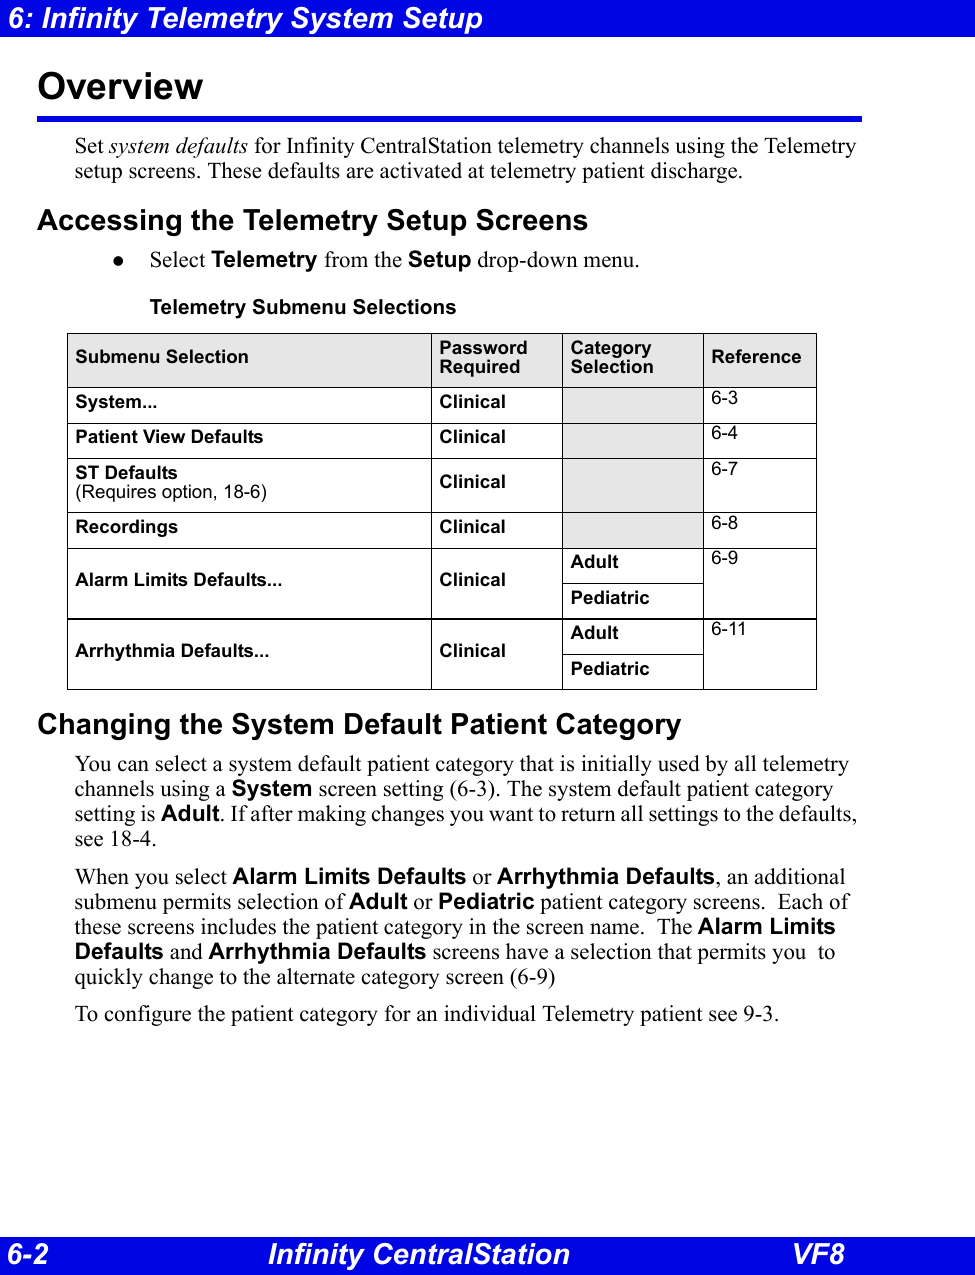 6-2 Infinity CentralStation VF86: Infinity Telemetry System SetupOverview Set system defaults for Infinity CentralStation telemetry channels using the Telemetry setup screens. These defaults are activated at telemetry patient discharge.Accessing the Telemetry Setup ScreenszSelect Telemetry from the Setup drop-down menu.Changing the System Default Patient CategoryYou can select a system default patient category that is initially used by all telemetry channels using a System screen setting (6-3). The system default patient category setting is Adult. If after making changes you want to return all settings to the defaults, see 18-4.When you select Alarm Limits Defaults or Arrhythmia Defaults, an additional submenu permits selection of Adult or Pediatric patient category screens.  Each of these screens includes the patient category in the screen name.  The Alarm Limits Defaults and Arrhythmia Defaults screens have a selection that permits you  to quickly change to the alternate category screen (6-9)To configure the patient category for an individual Telemetry patient see 9-3.Telemetry Submenu SelectionsSubmenu Selection PasswordRequiredCategory Selection ReferenceSystem... Clinical 6-3Patient View Defaults Clinical 6-4ST Defaults (Requires option, 18-6) Clinical 6-7Recordings Clinical 6-8Alarm Limits Defaults... Clinical Adult 6-9PediatricArrhythmia Defaults... ClinicalAdult 6-11Pediatric